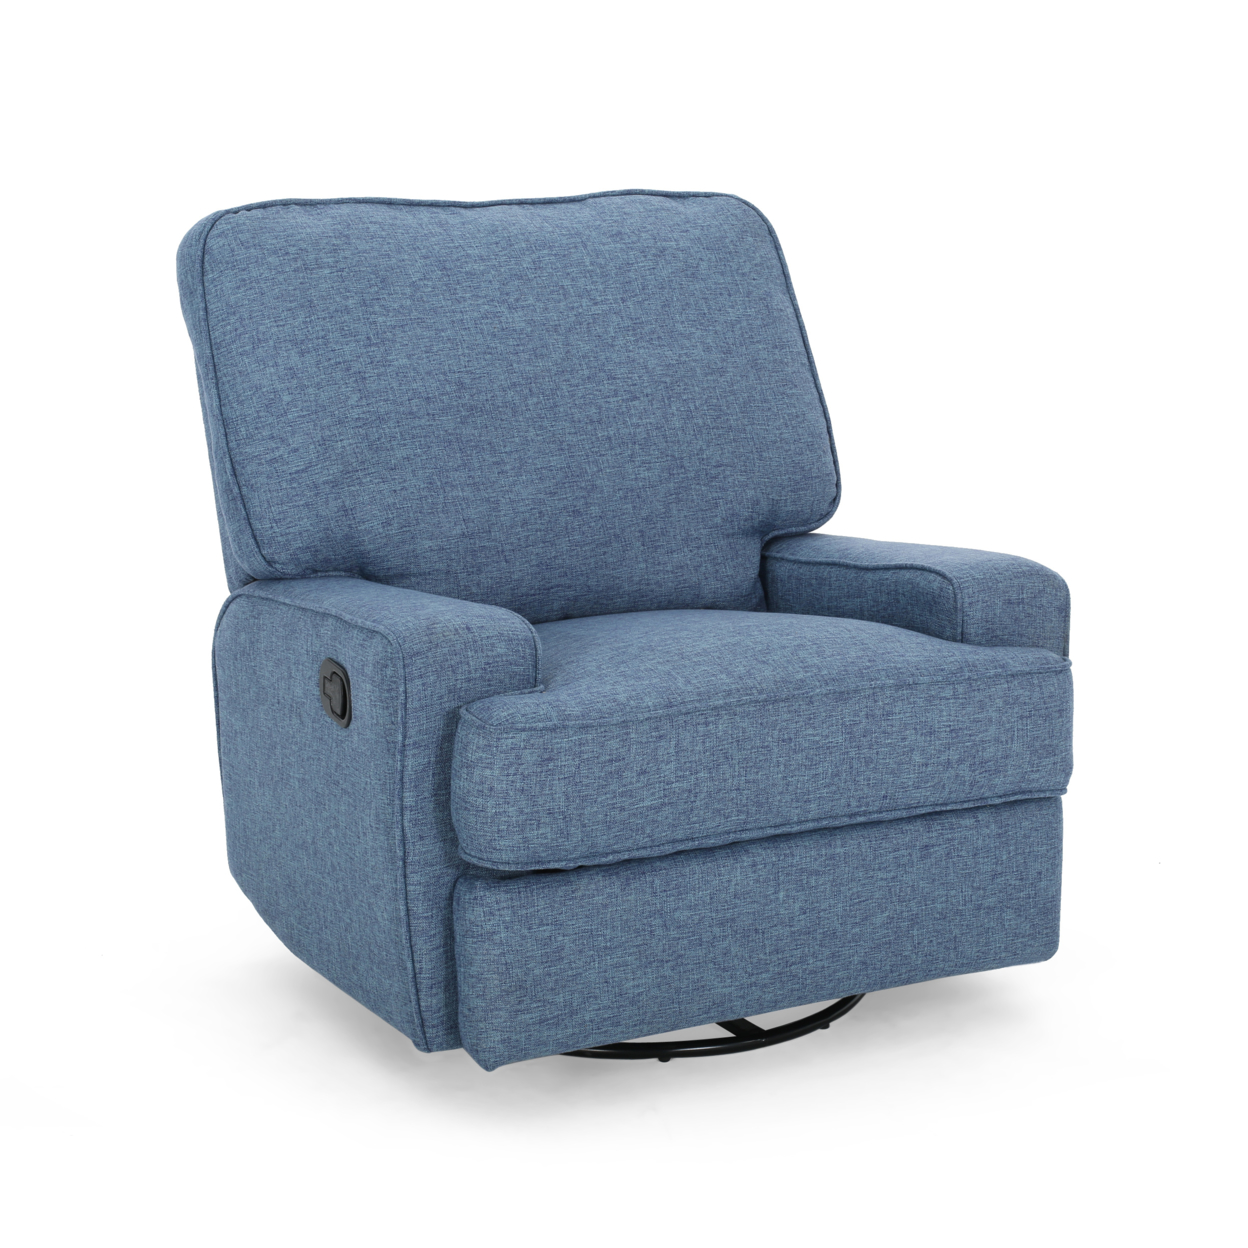 Sibyl Glider Recliner With Swivel, Traditional - Navy Blue